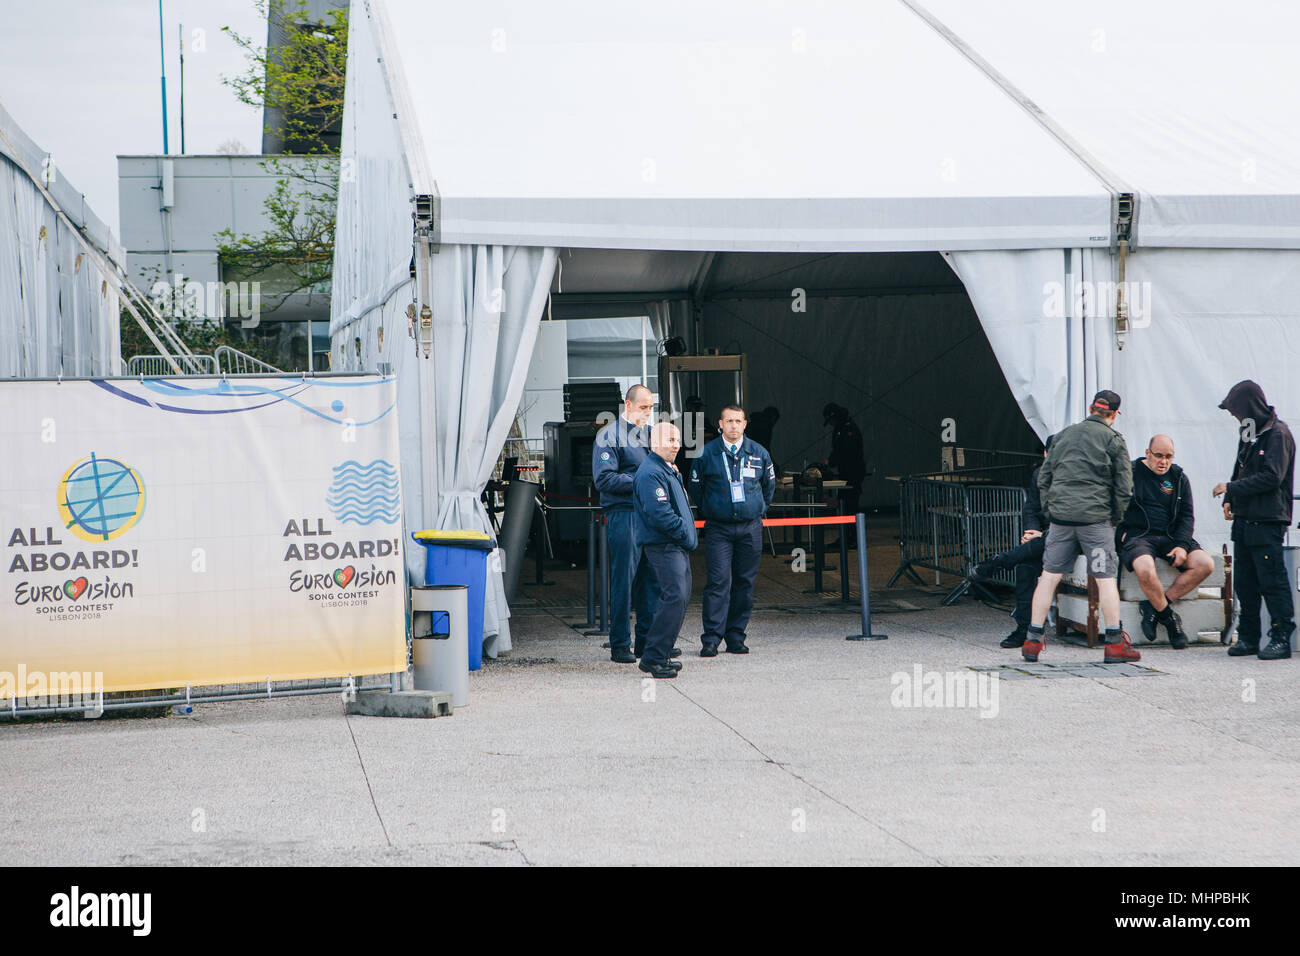 Portugal, Lisbon 29 april 2018: security guards or examination point or law and order workers around Stadium Altice Arena. Preparation for Eurovision Song Contest Stock Photo